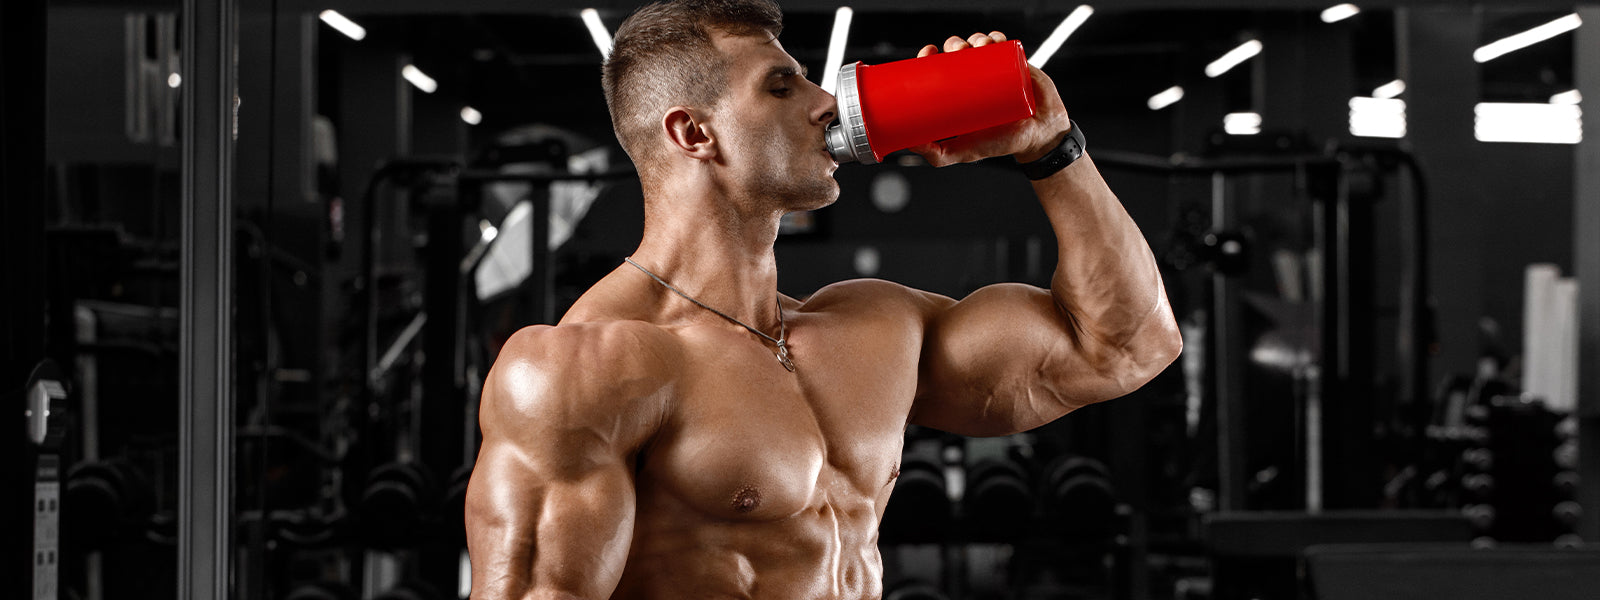 How Much Protein Do You Need a Day to Gain Muscle (And Where Should It Come From?)